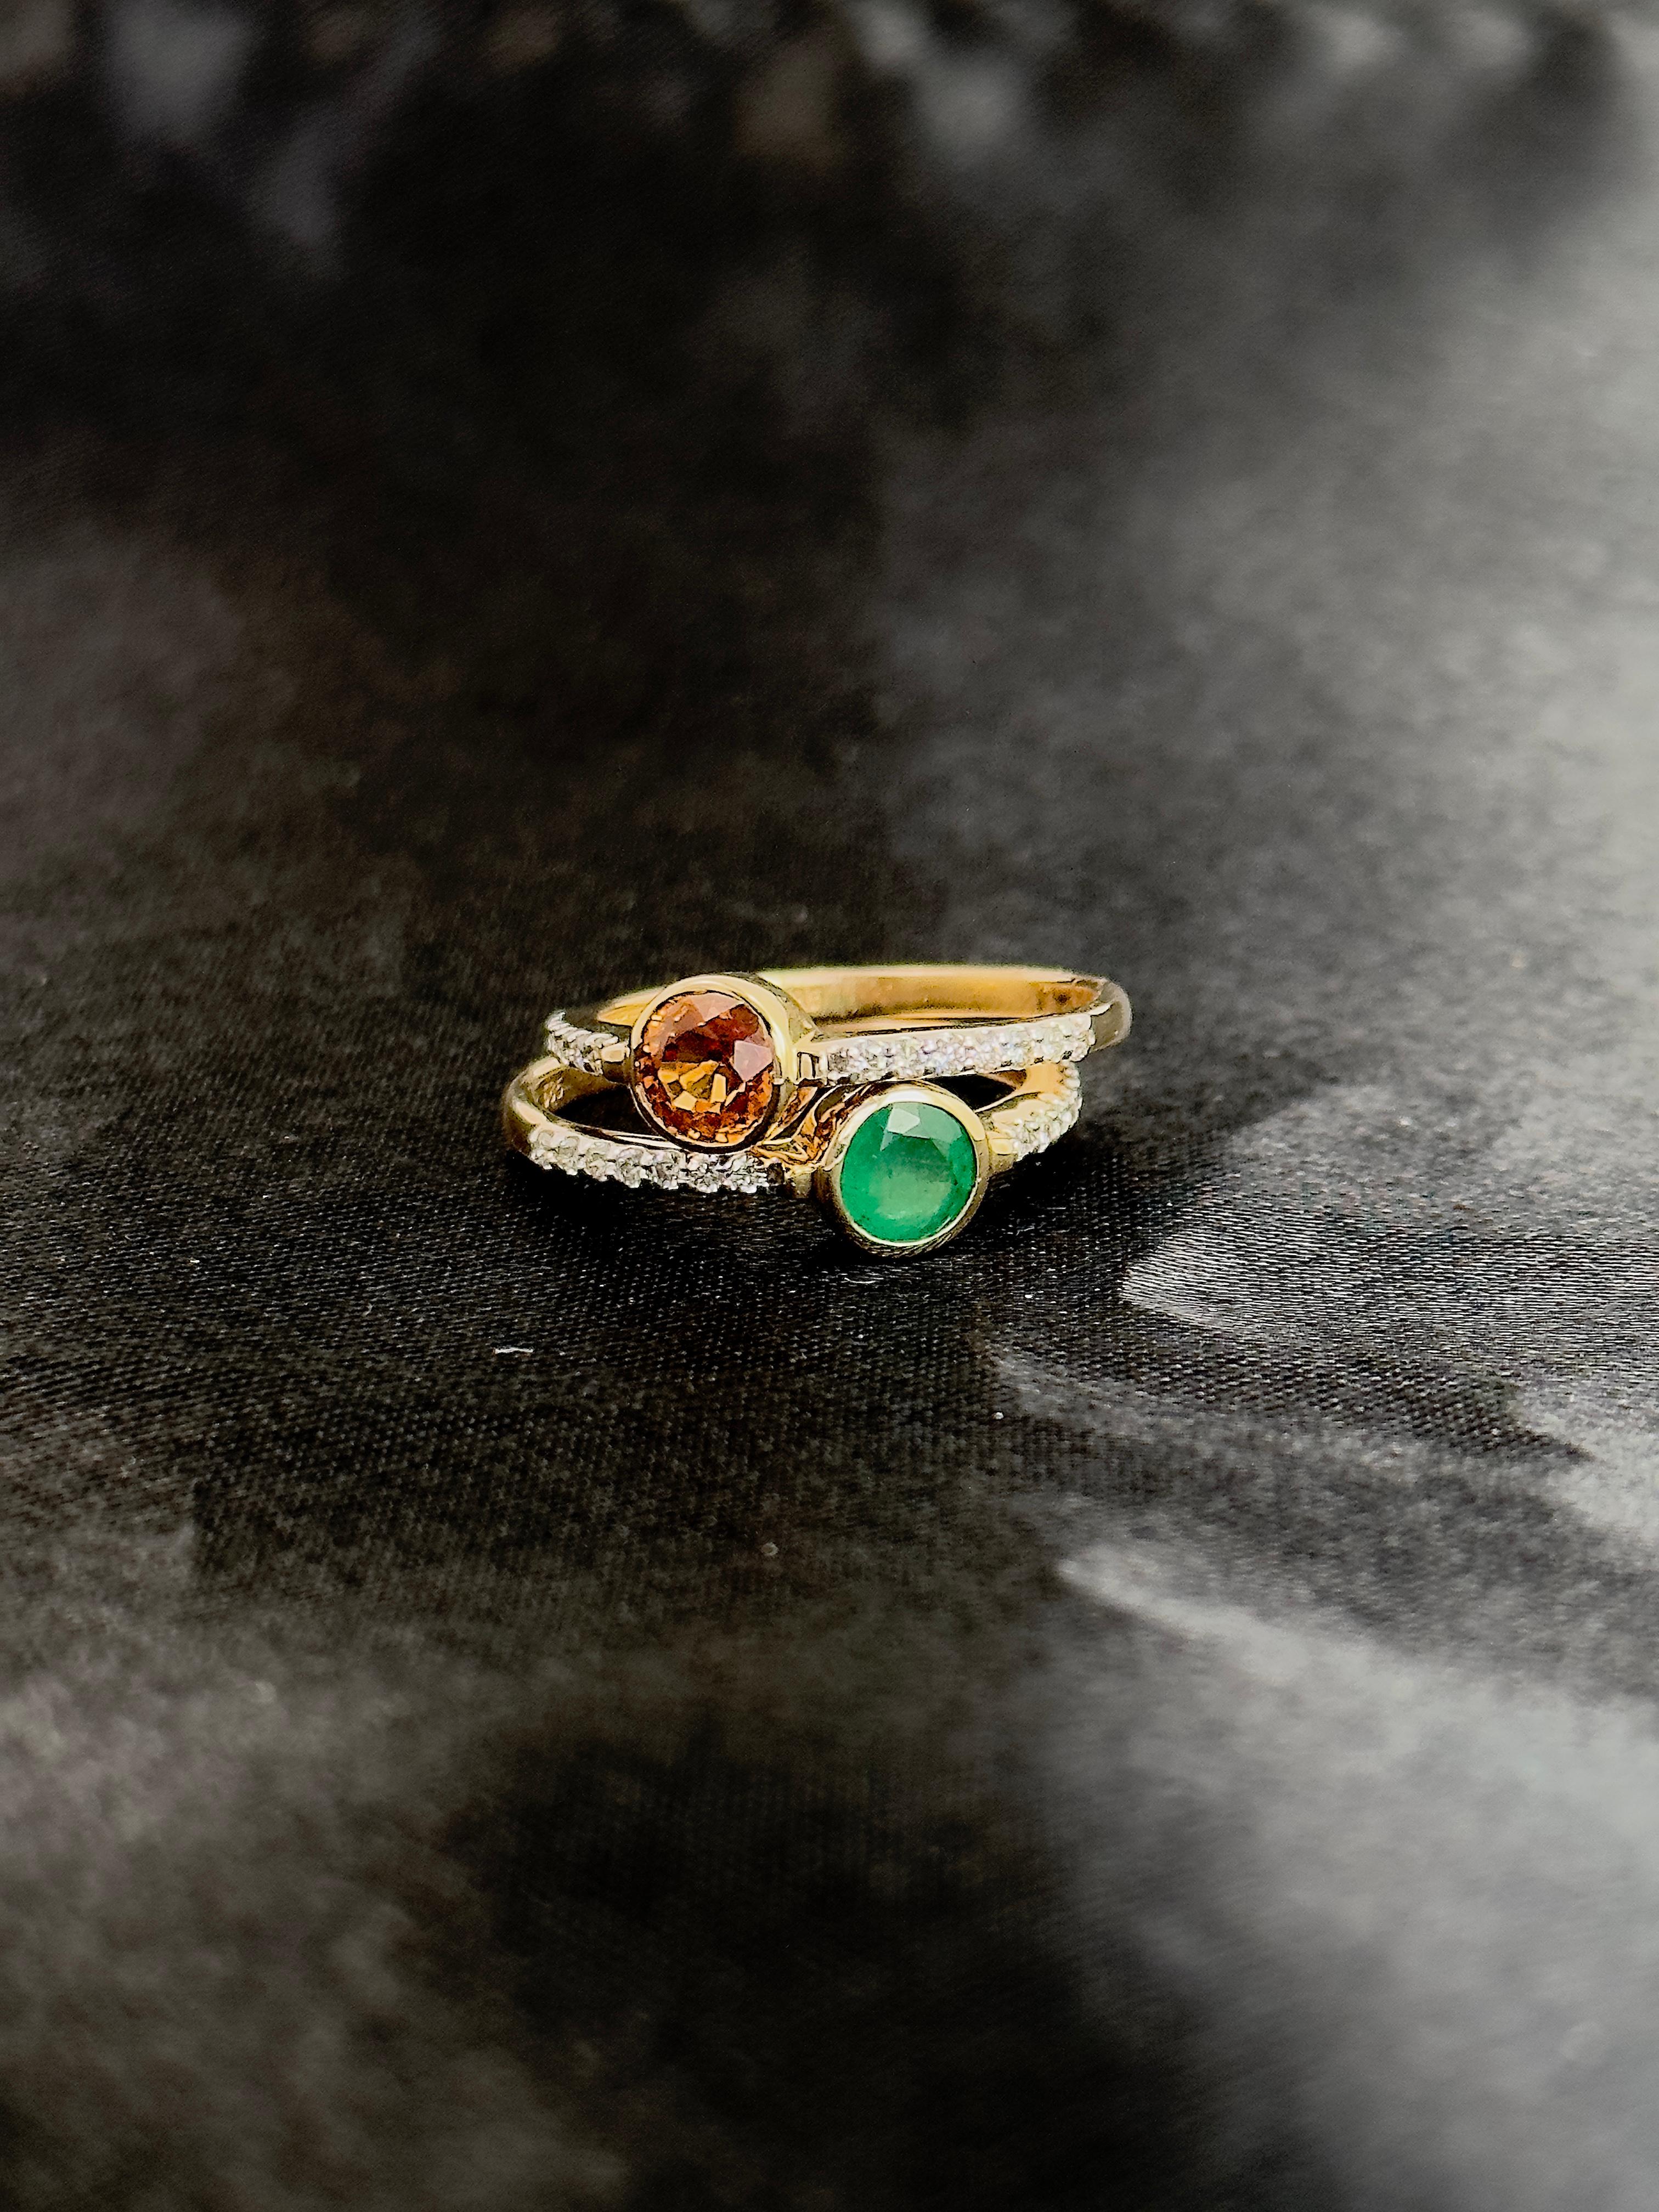 Adding to our brand new collection are the gemstone solitaire bezel set rings! One beautiful gemstone in the center, and small diamonds on both sides of the shank. Natural gemstones, natural diamonds, and 14k yellow gold make a great combination of